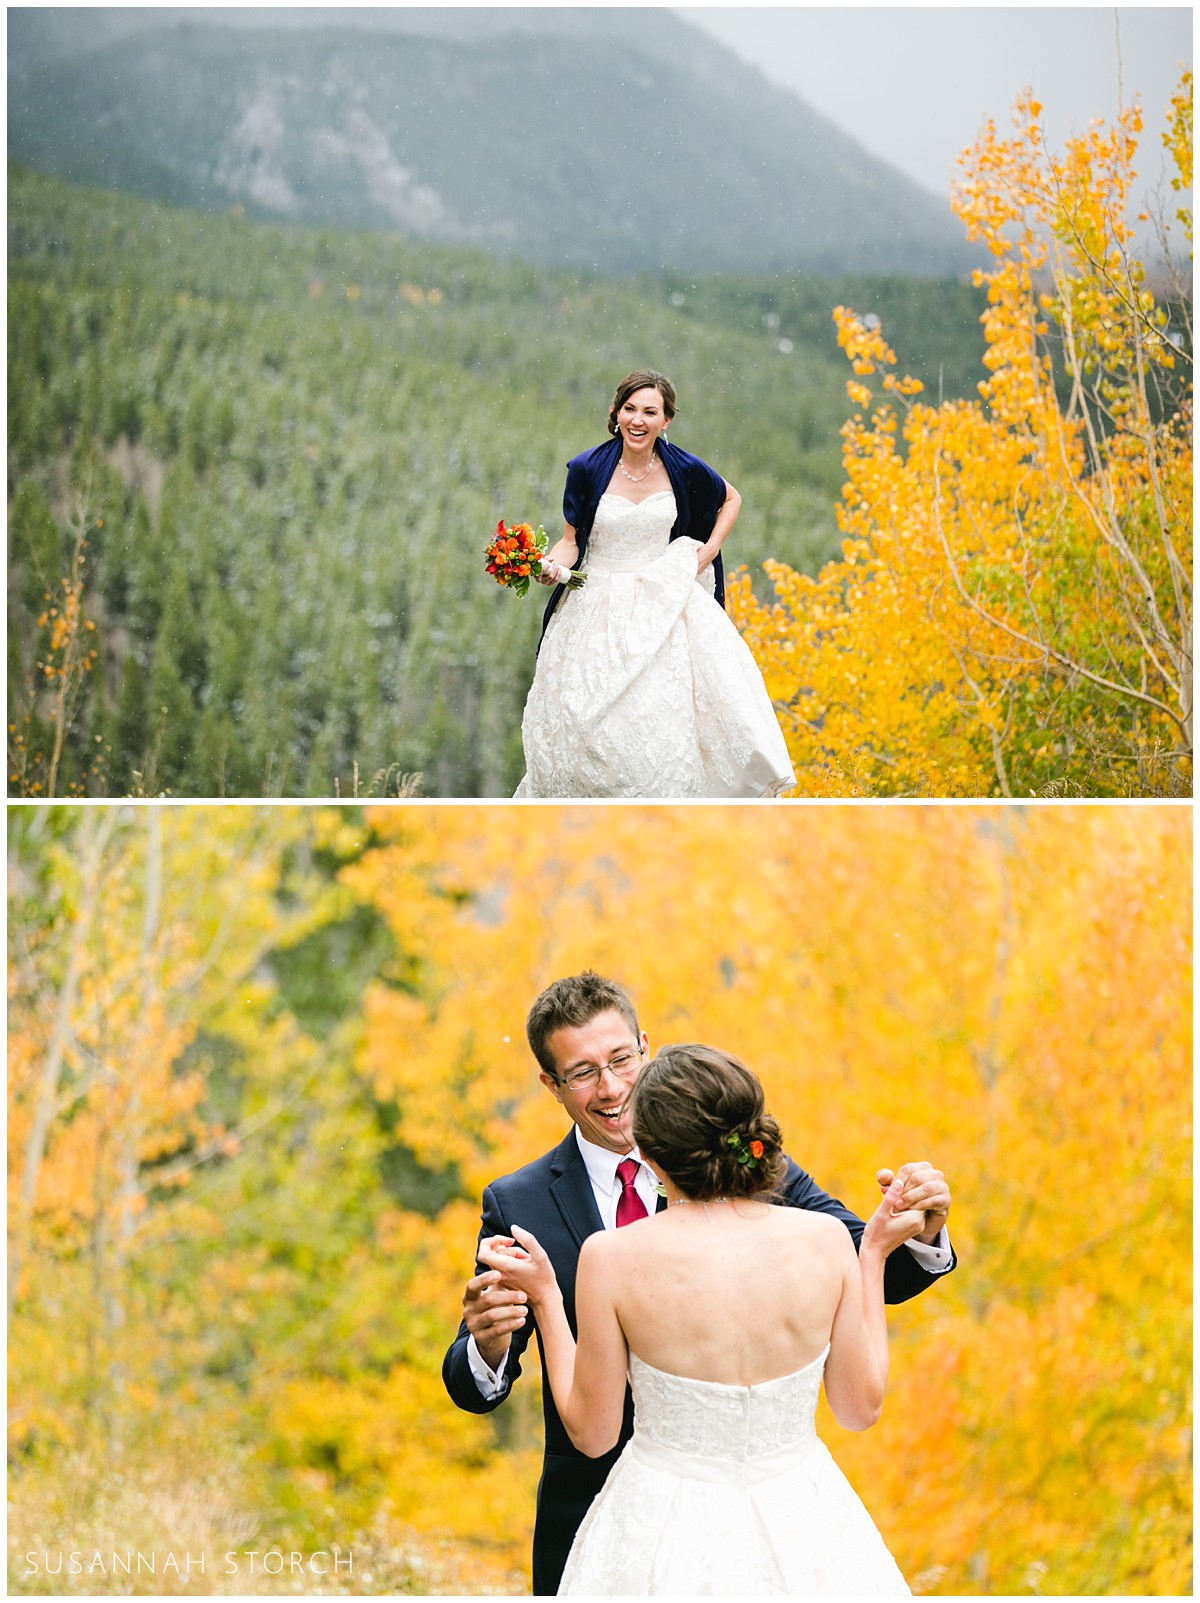 two images -- one of a bride walking in front of a snowy mountain backdrop and the other of a groom smiling at the bride